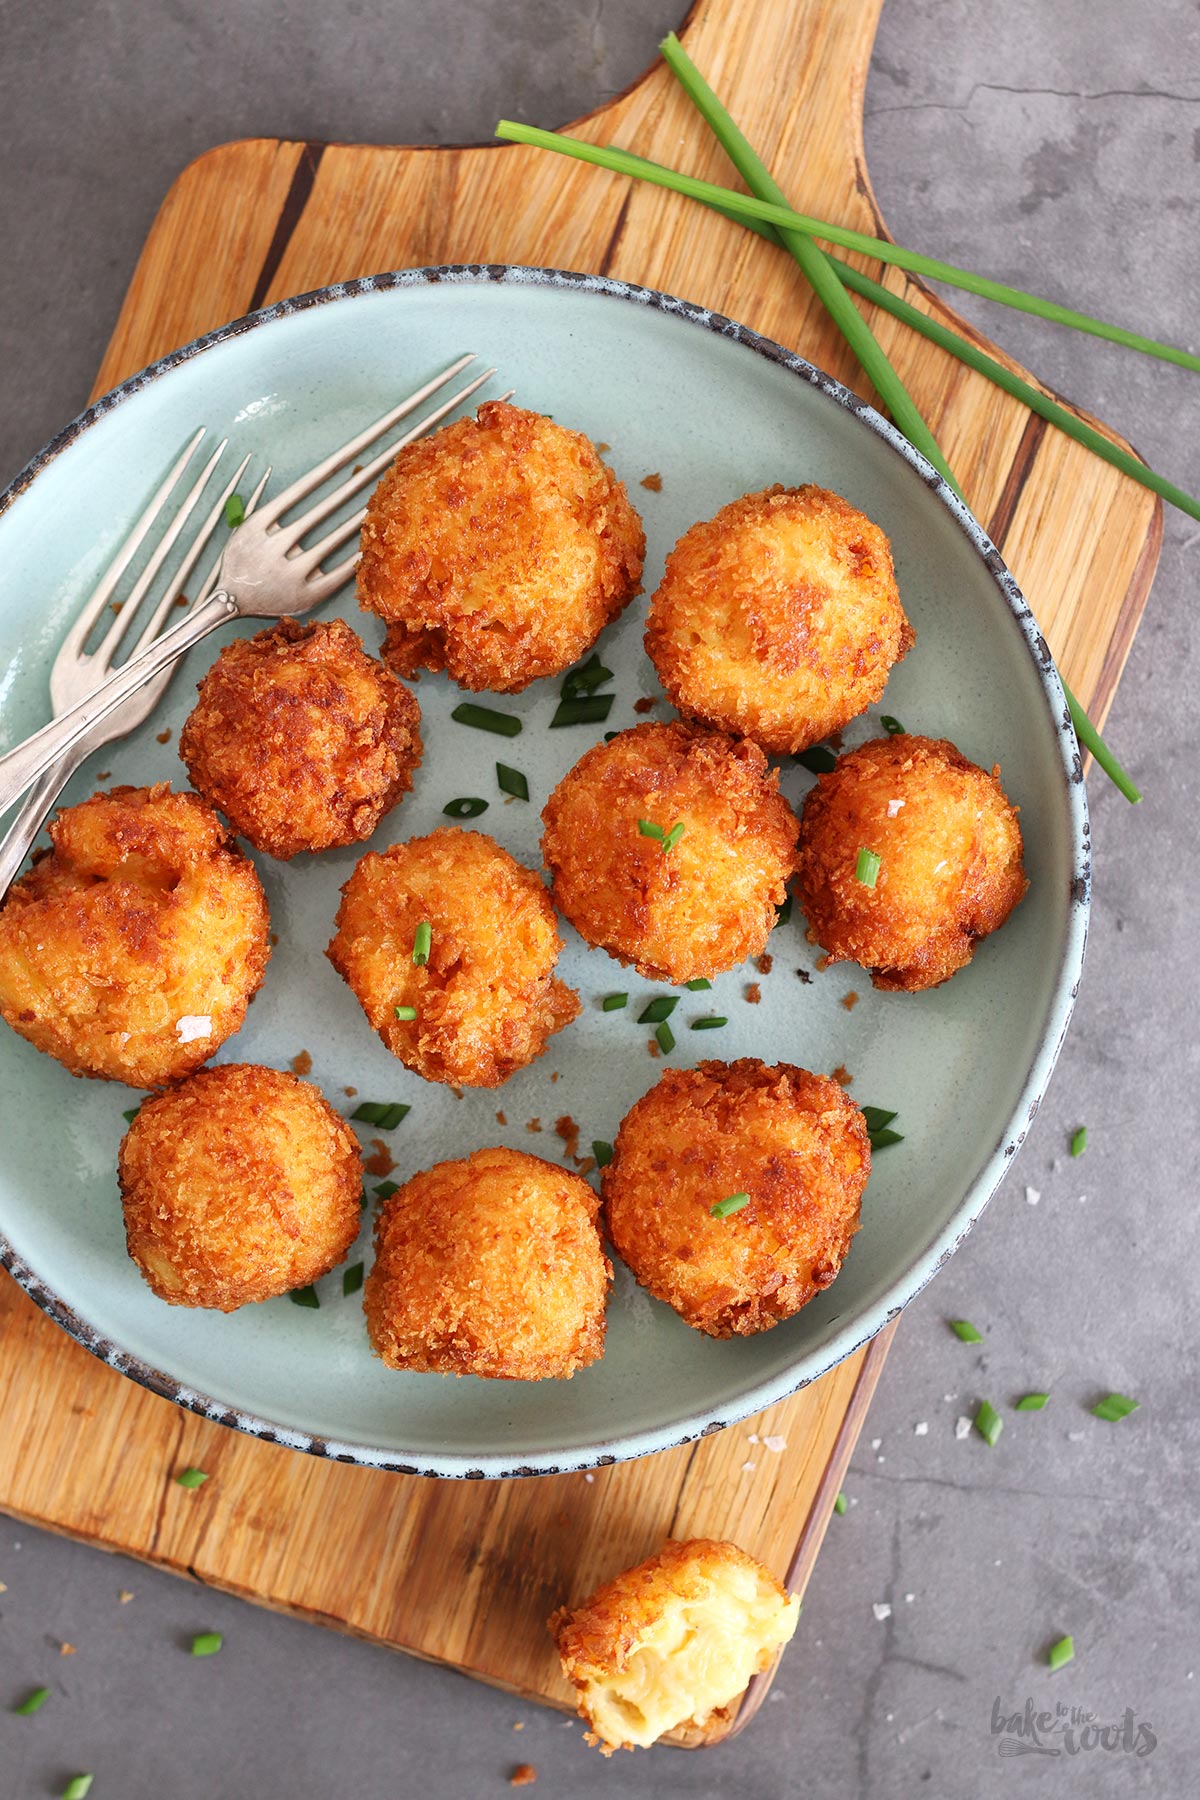 Fried Mac 'n' Cheese Balls | Bake to the roots